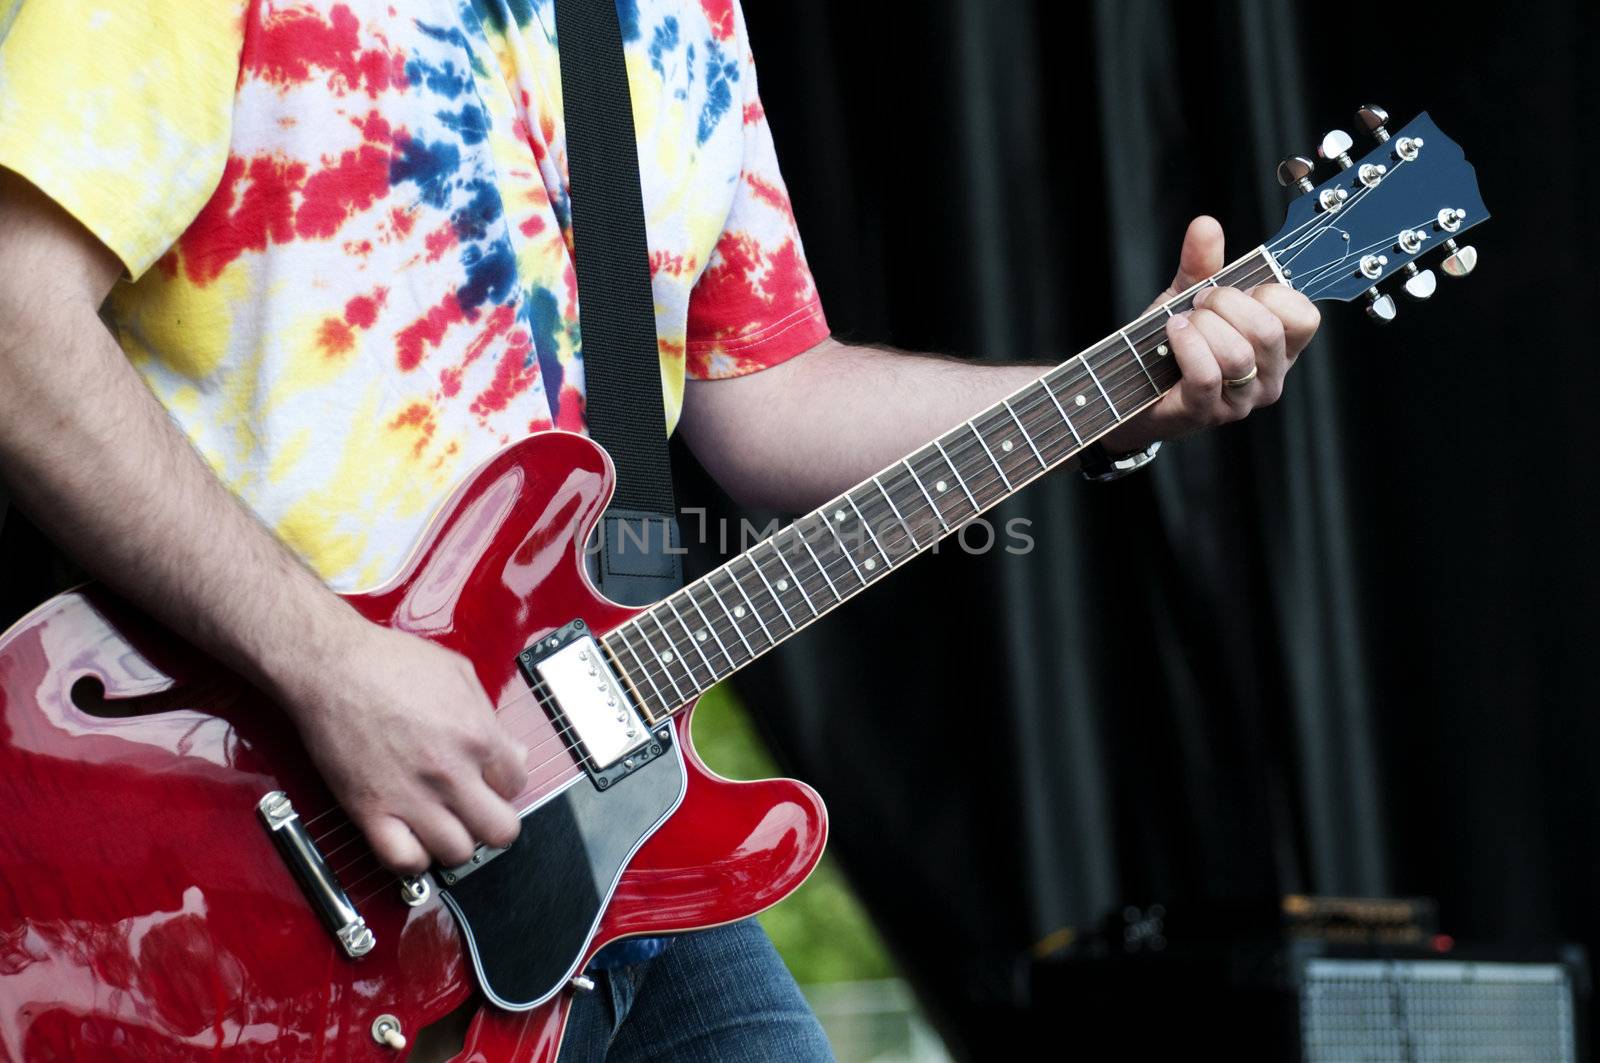 Young musician playing an acoustic/electric guitar at a music festival, highlighting 60's style clothes